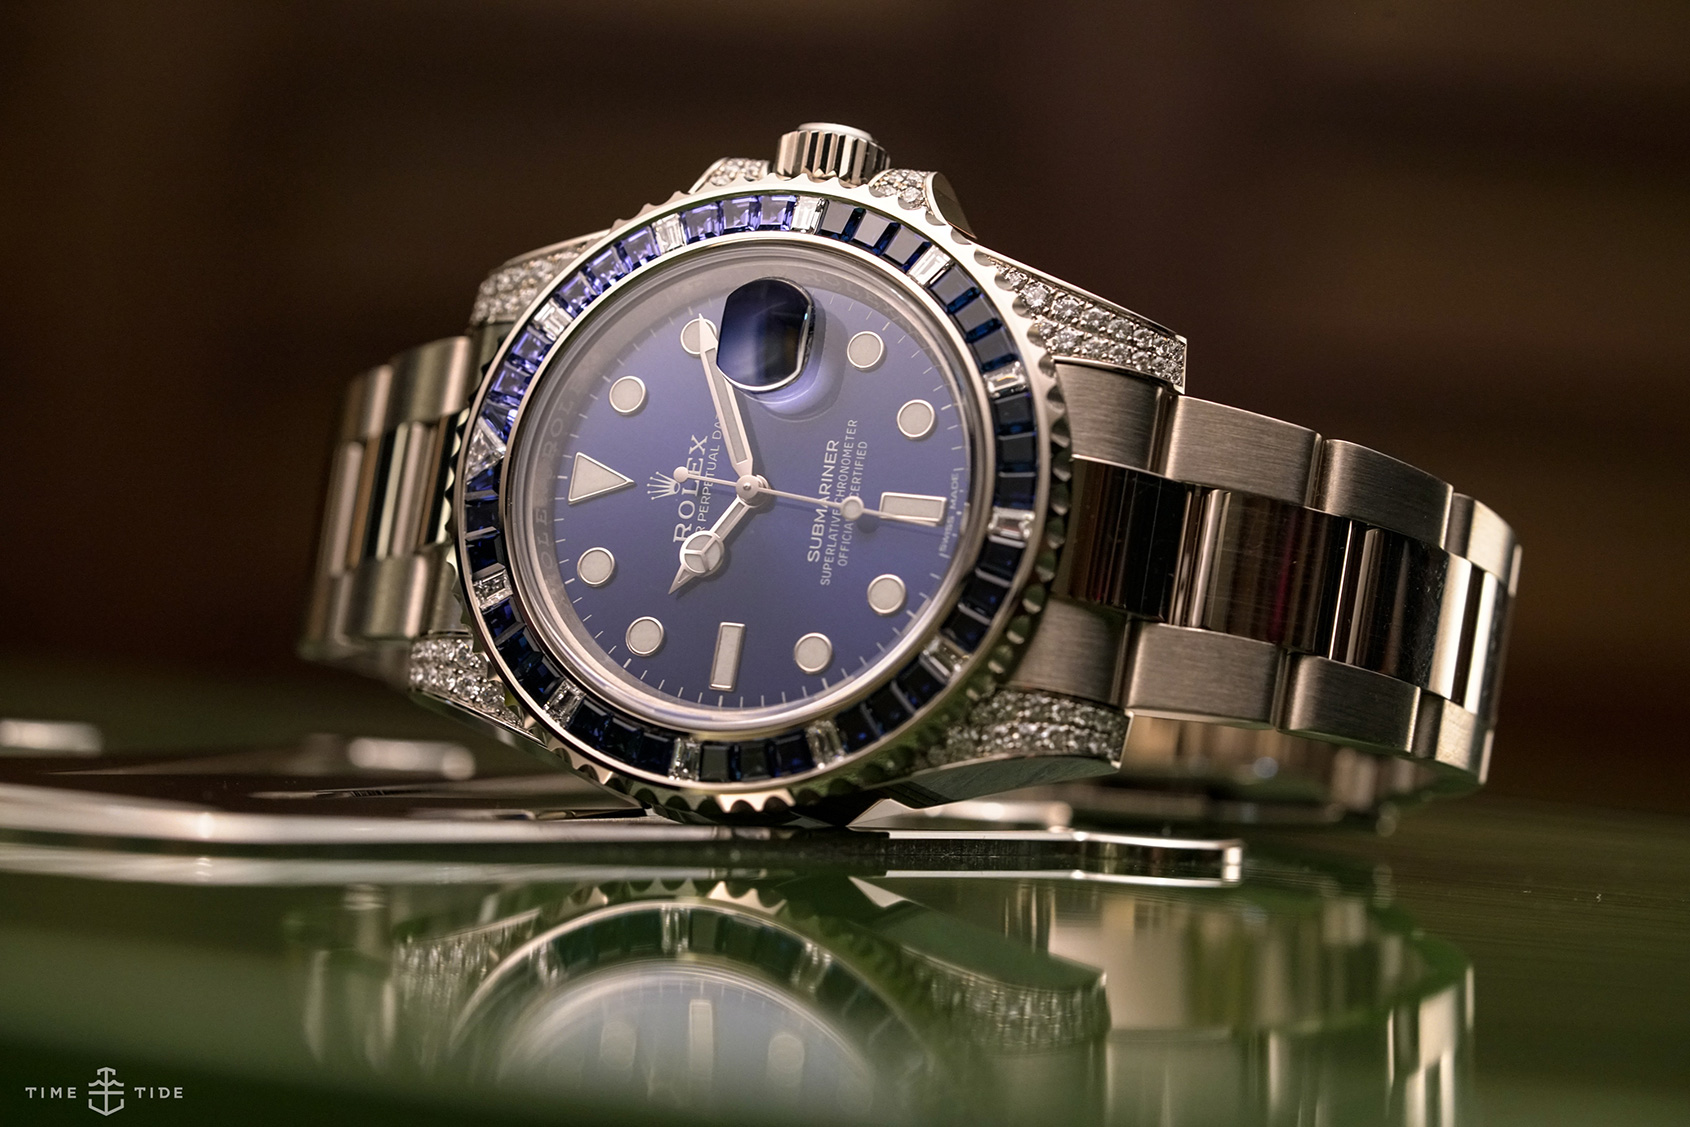 HANDS-ON: The mysterious Rolex 